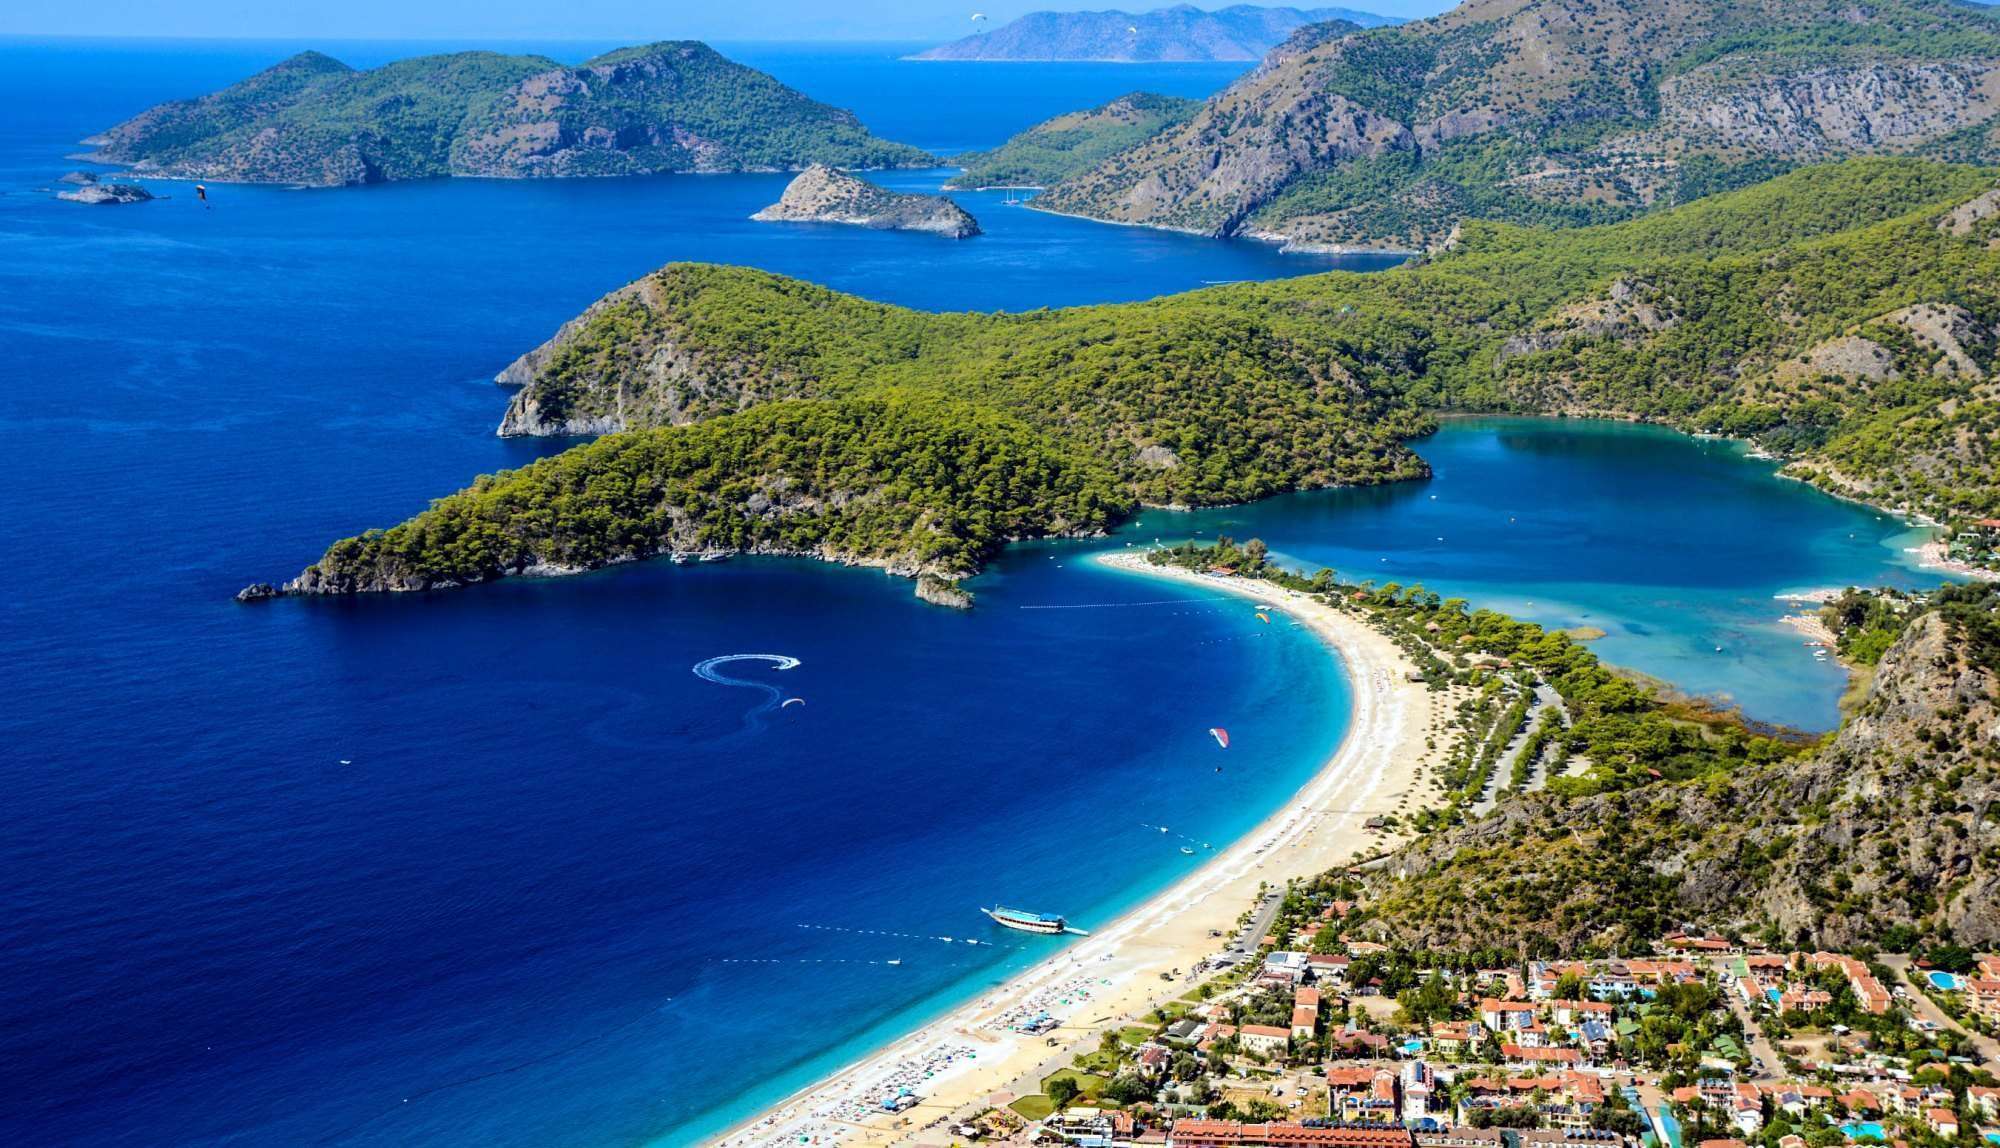  Beaches worth visiting in Mugla Province